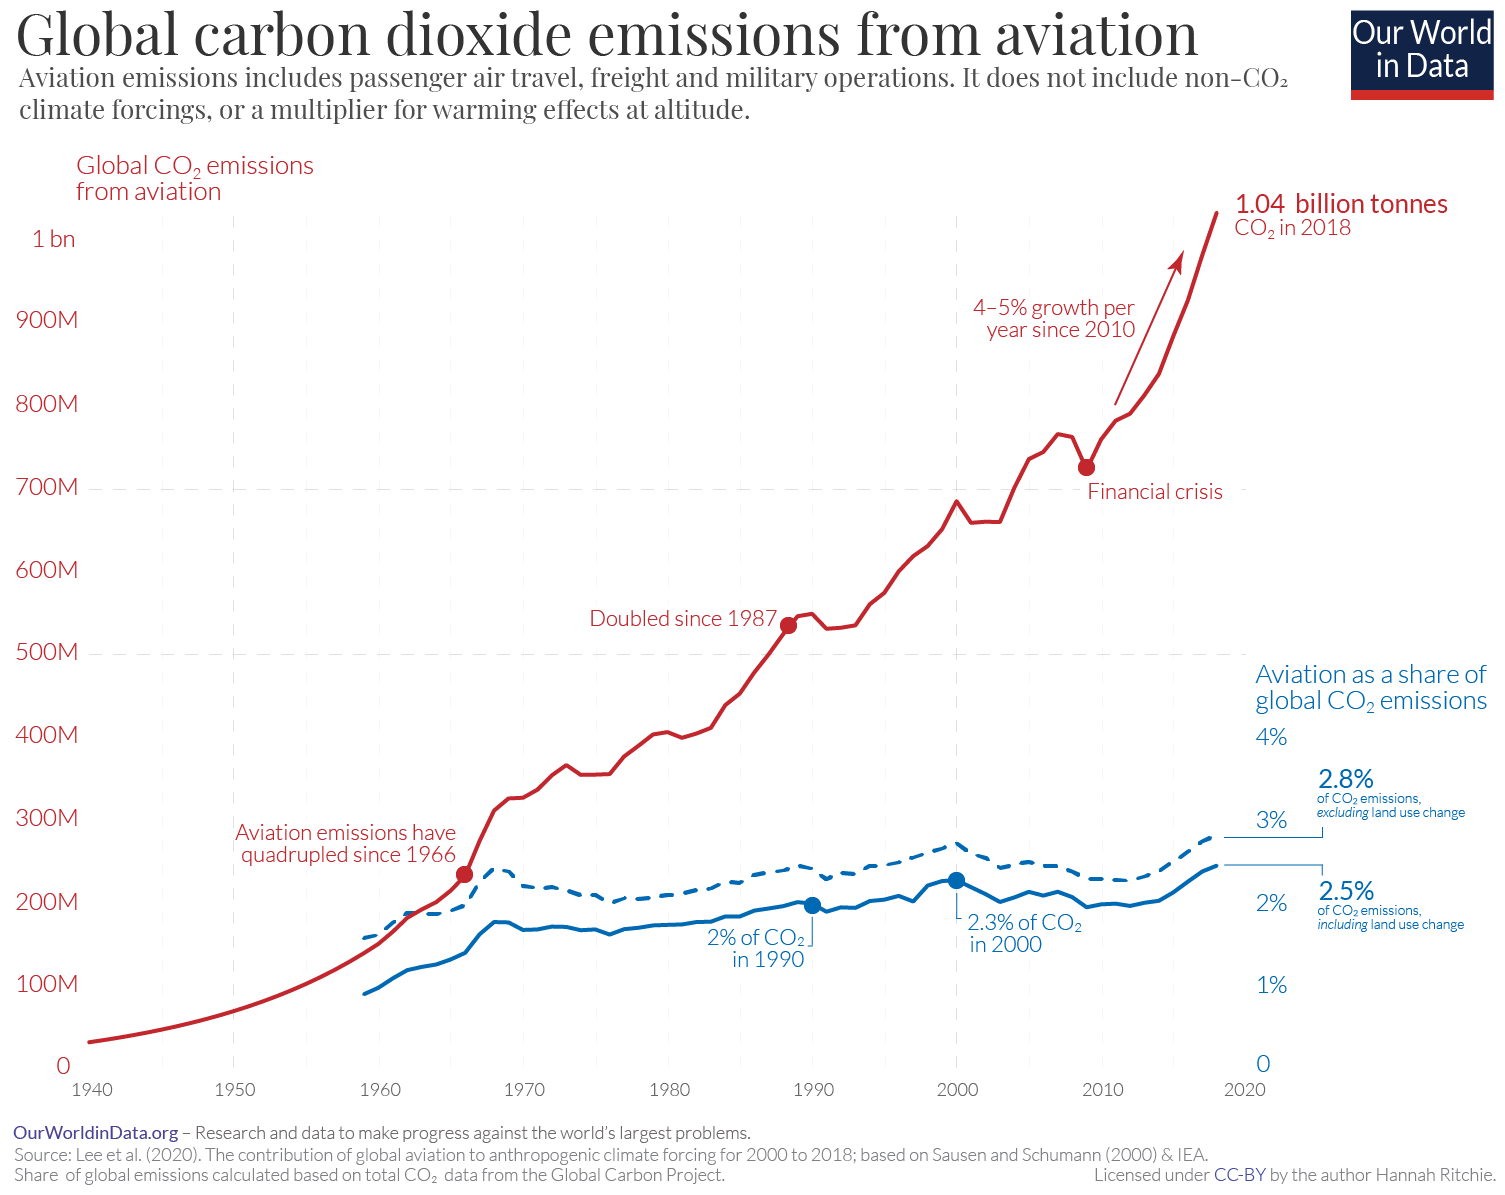 Graph showing the rise in global carbon dioxide emissions over time from 1940 to 2020.